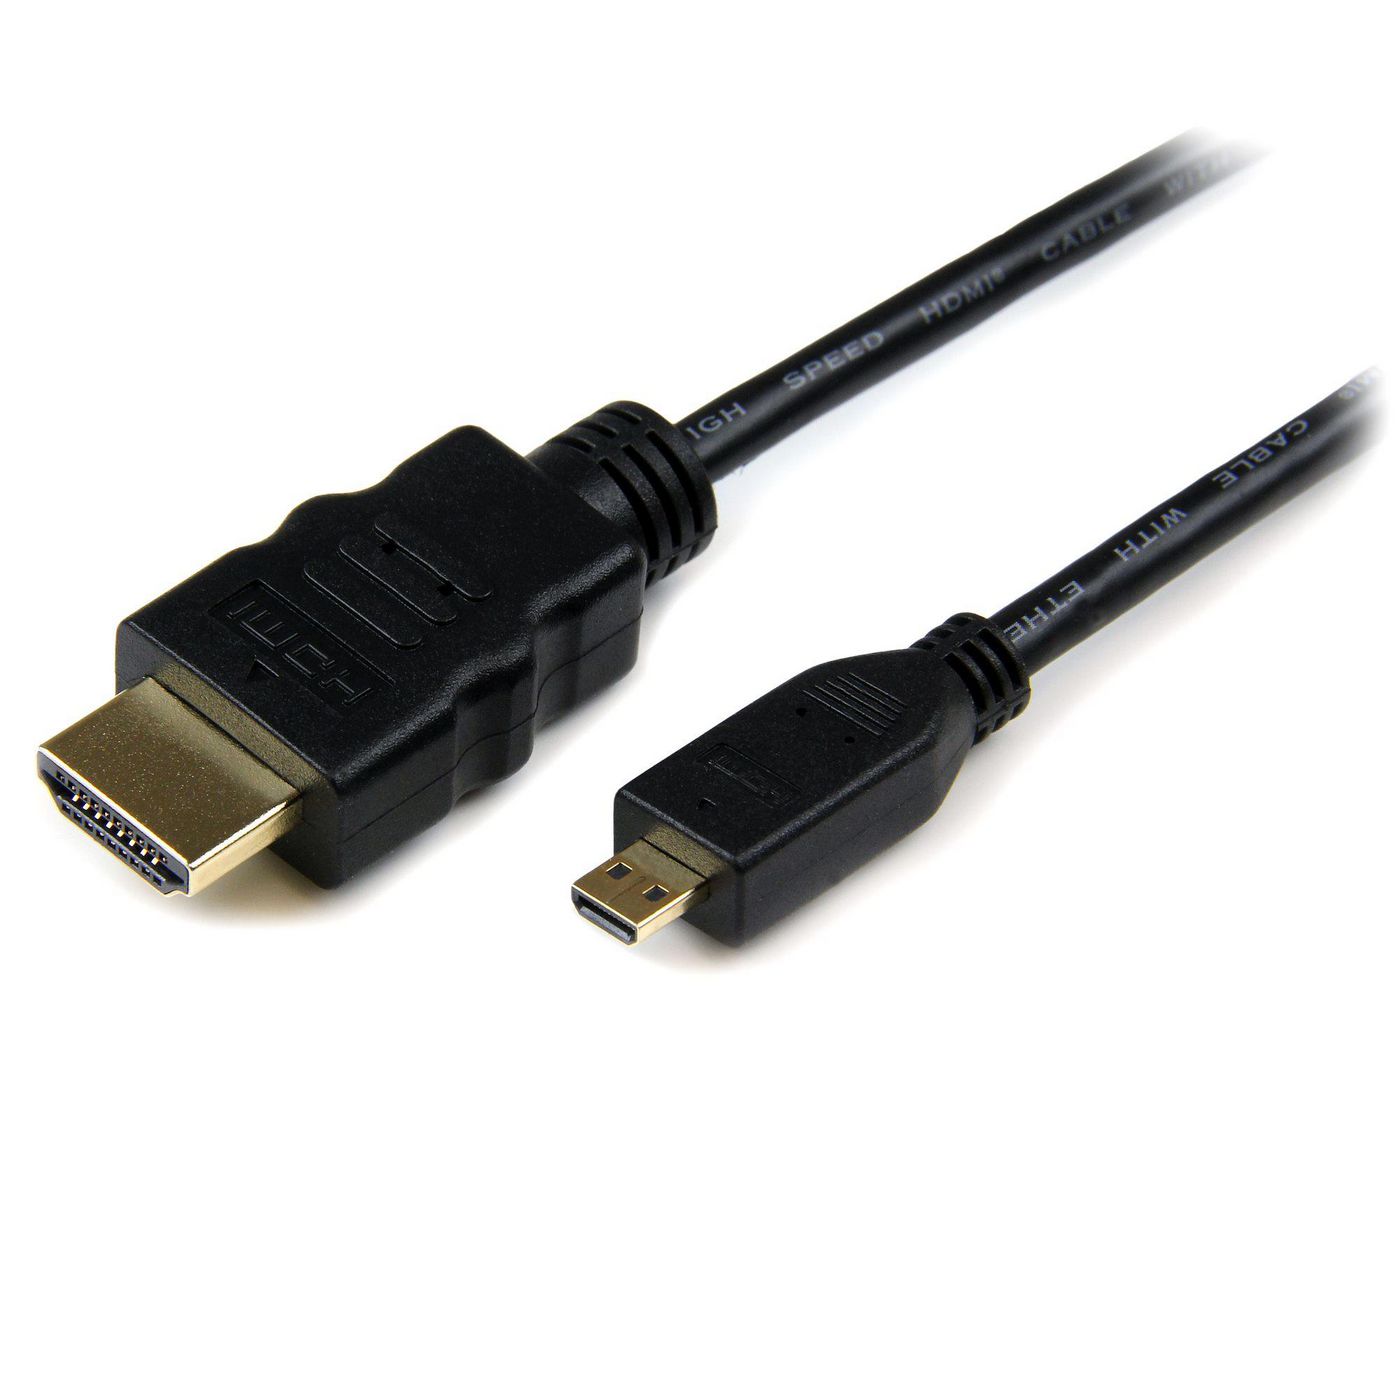 StarTechcom HDADMM2M 2M HDMI TO HDMI MICRO CABLE 